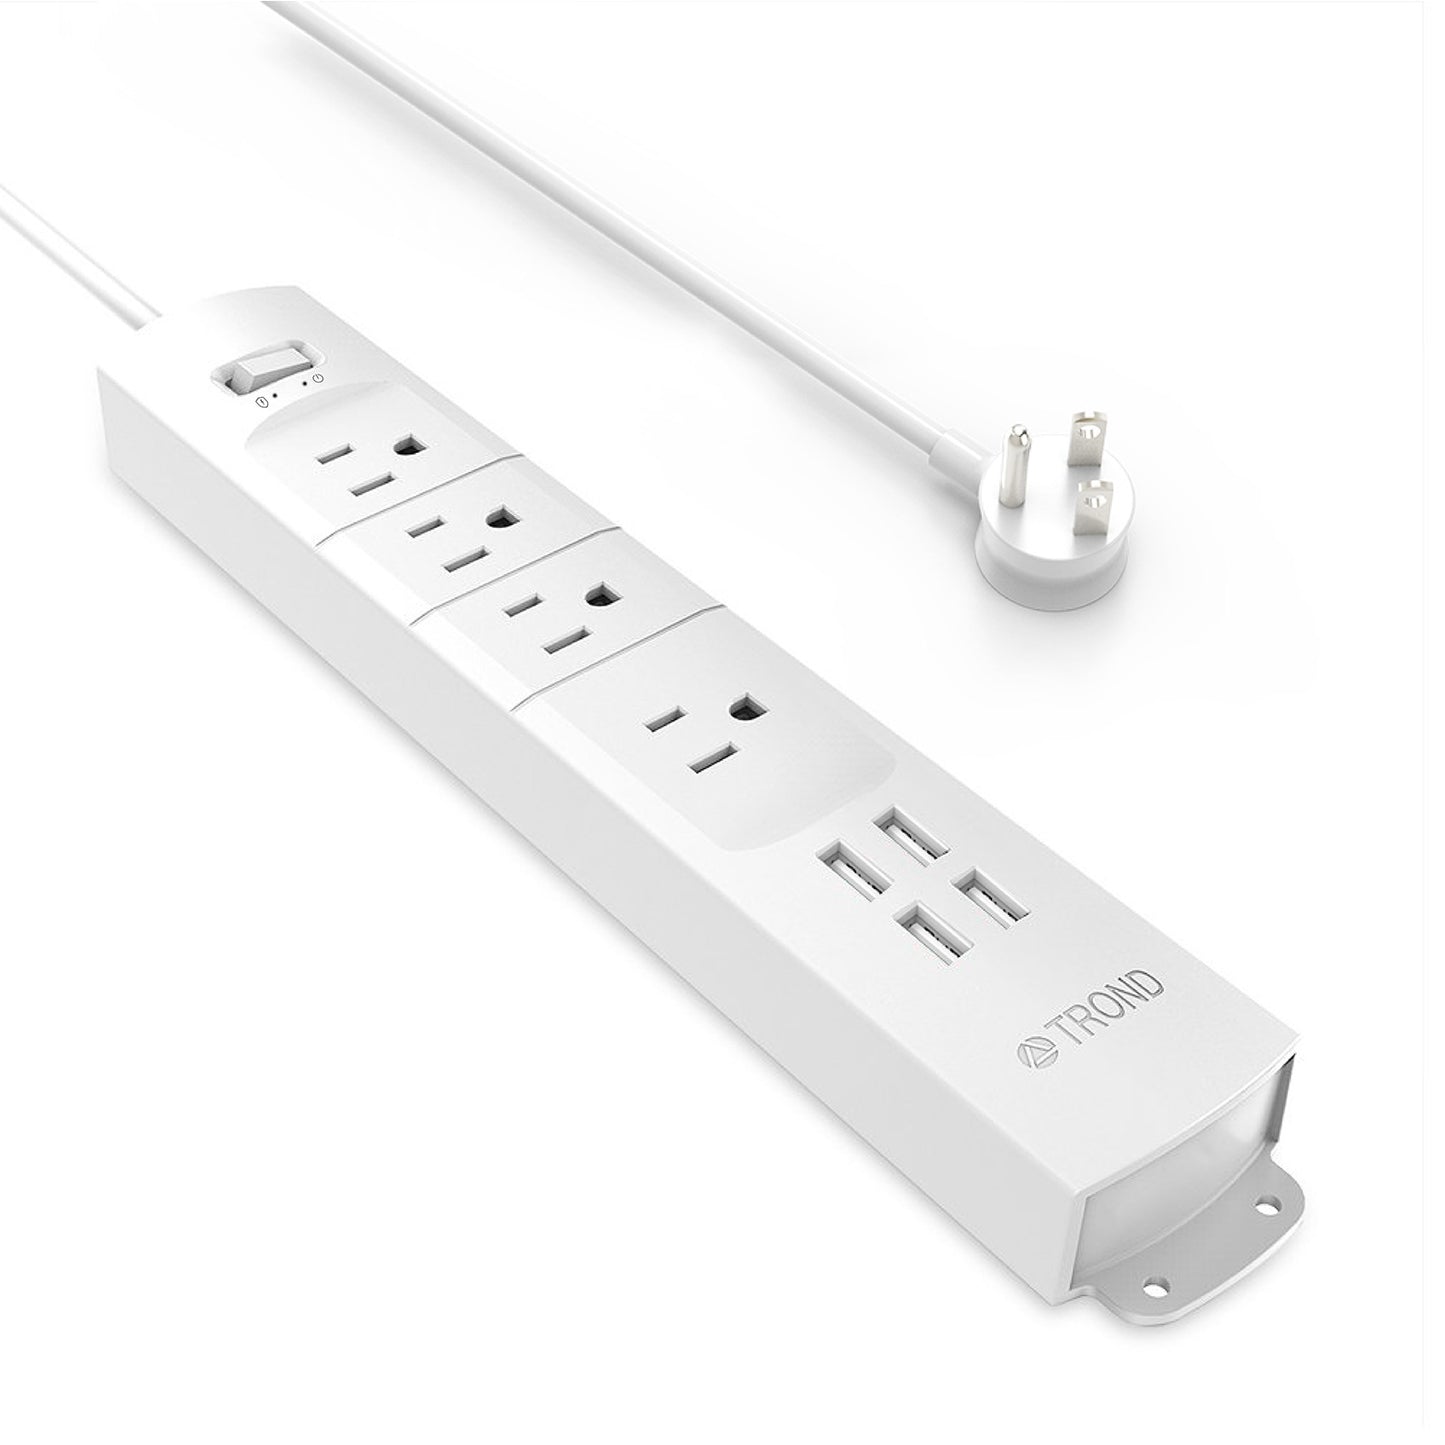  YAWMLYE 2000w Surge Protector Power Strip - 6 Ft Retractable  Extension Cord 4 Outlet 2 USB Ports Flat Plug Portable Black Power Strip  Cruise Ship Essentials for Travel Office Home Wall Mount : Electronics